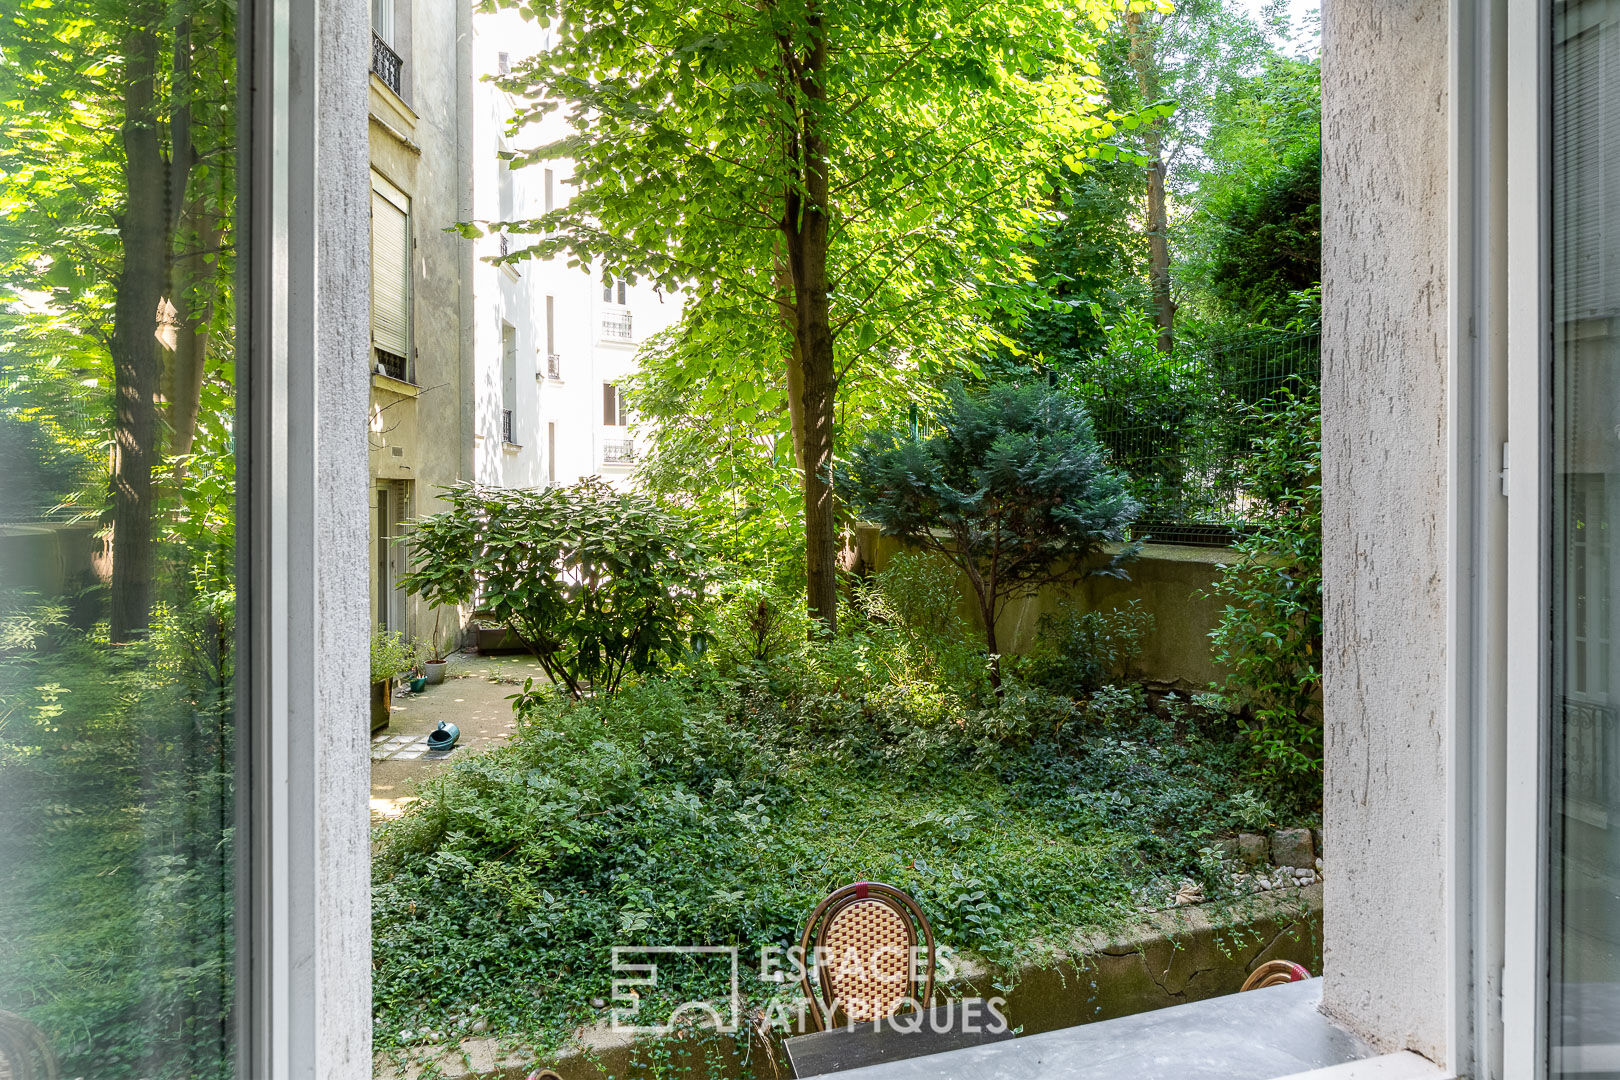 Apartment with Montmartre charm on garden